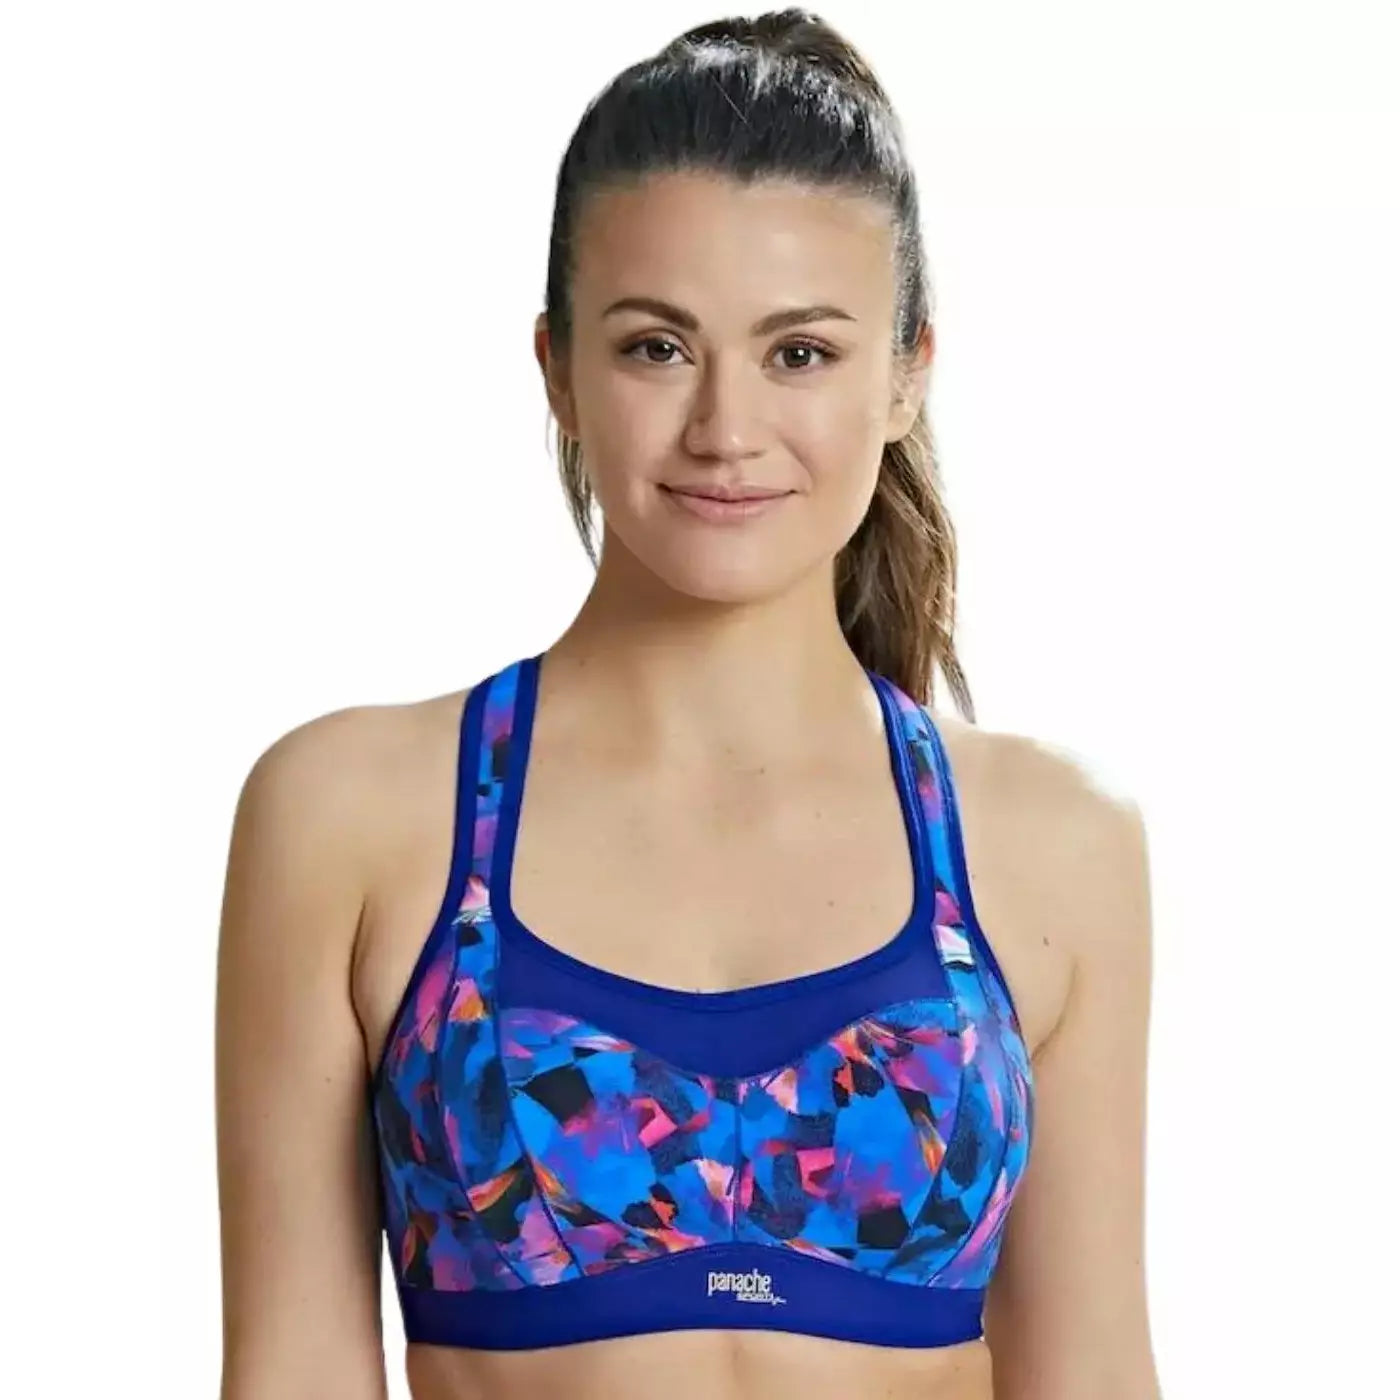 Panache Racerback Wired Sports - Neon Rave – The Lady's Slip